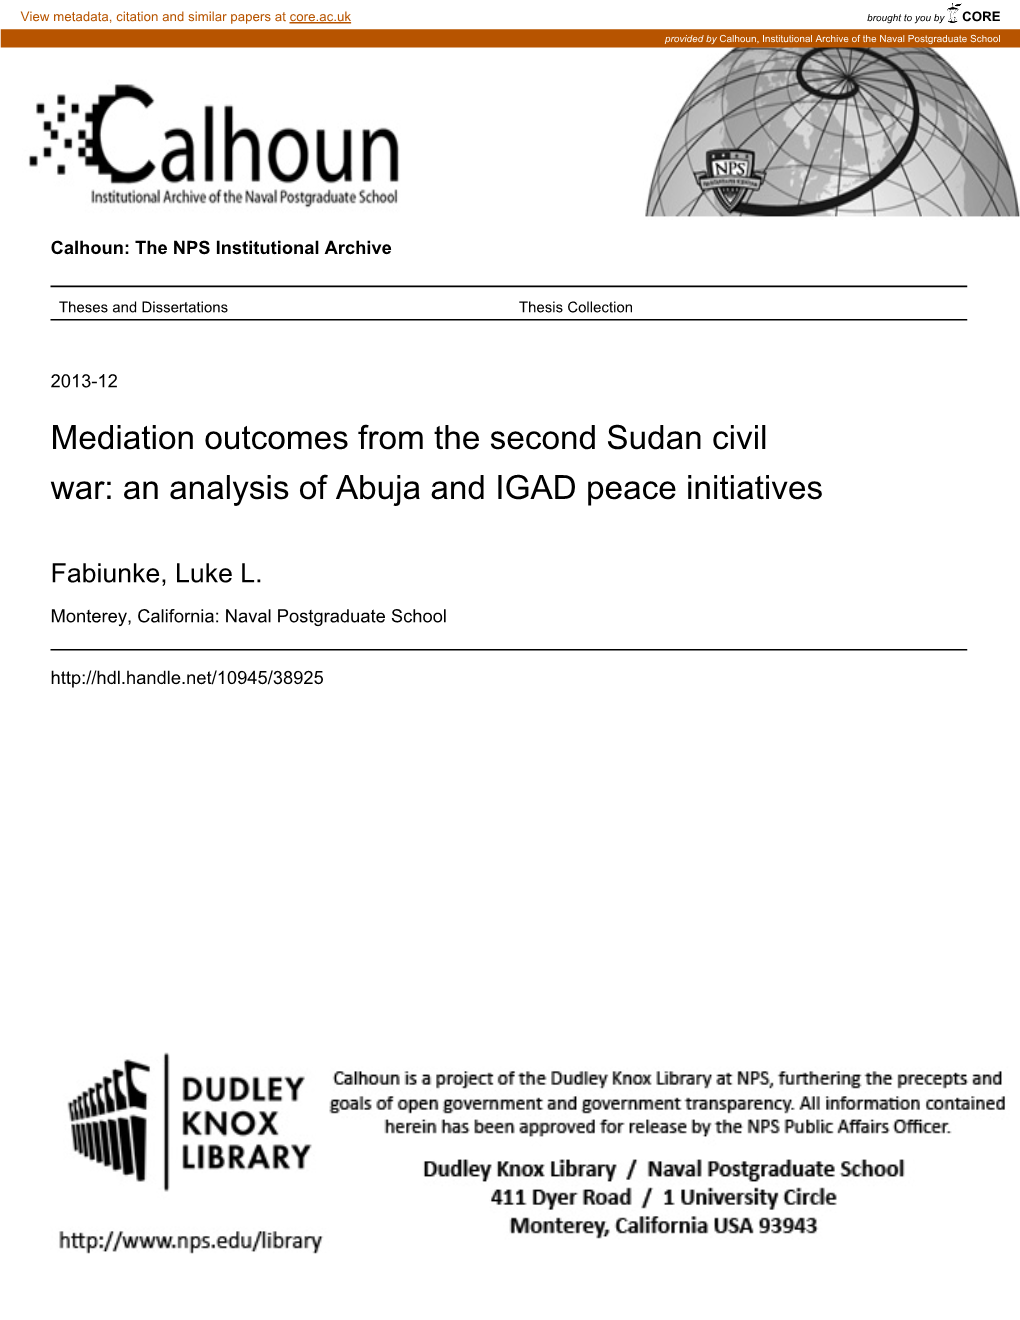 Mediation Outcomes from the Second Sudan Civil War: an Analysis of Abuja and IGAD Peace Initiatives